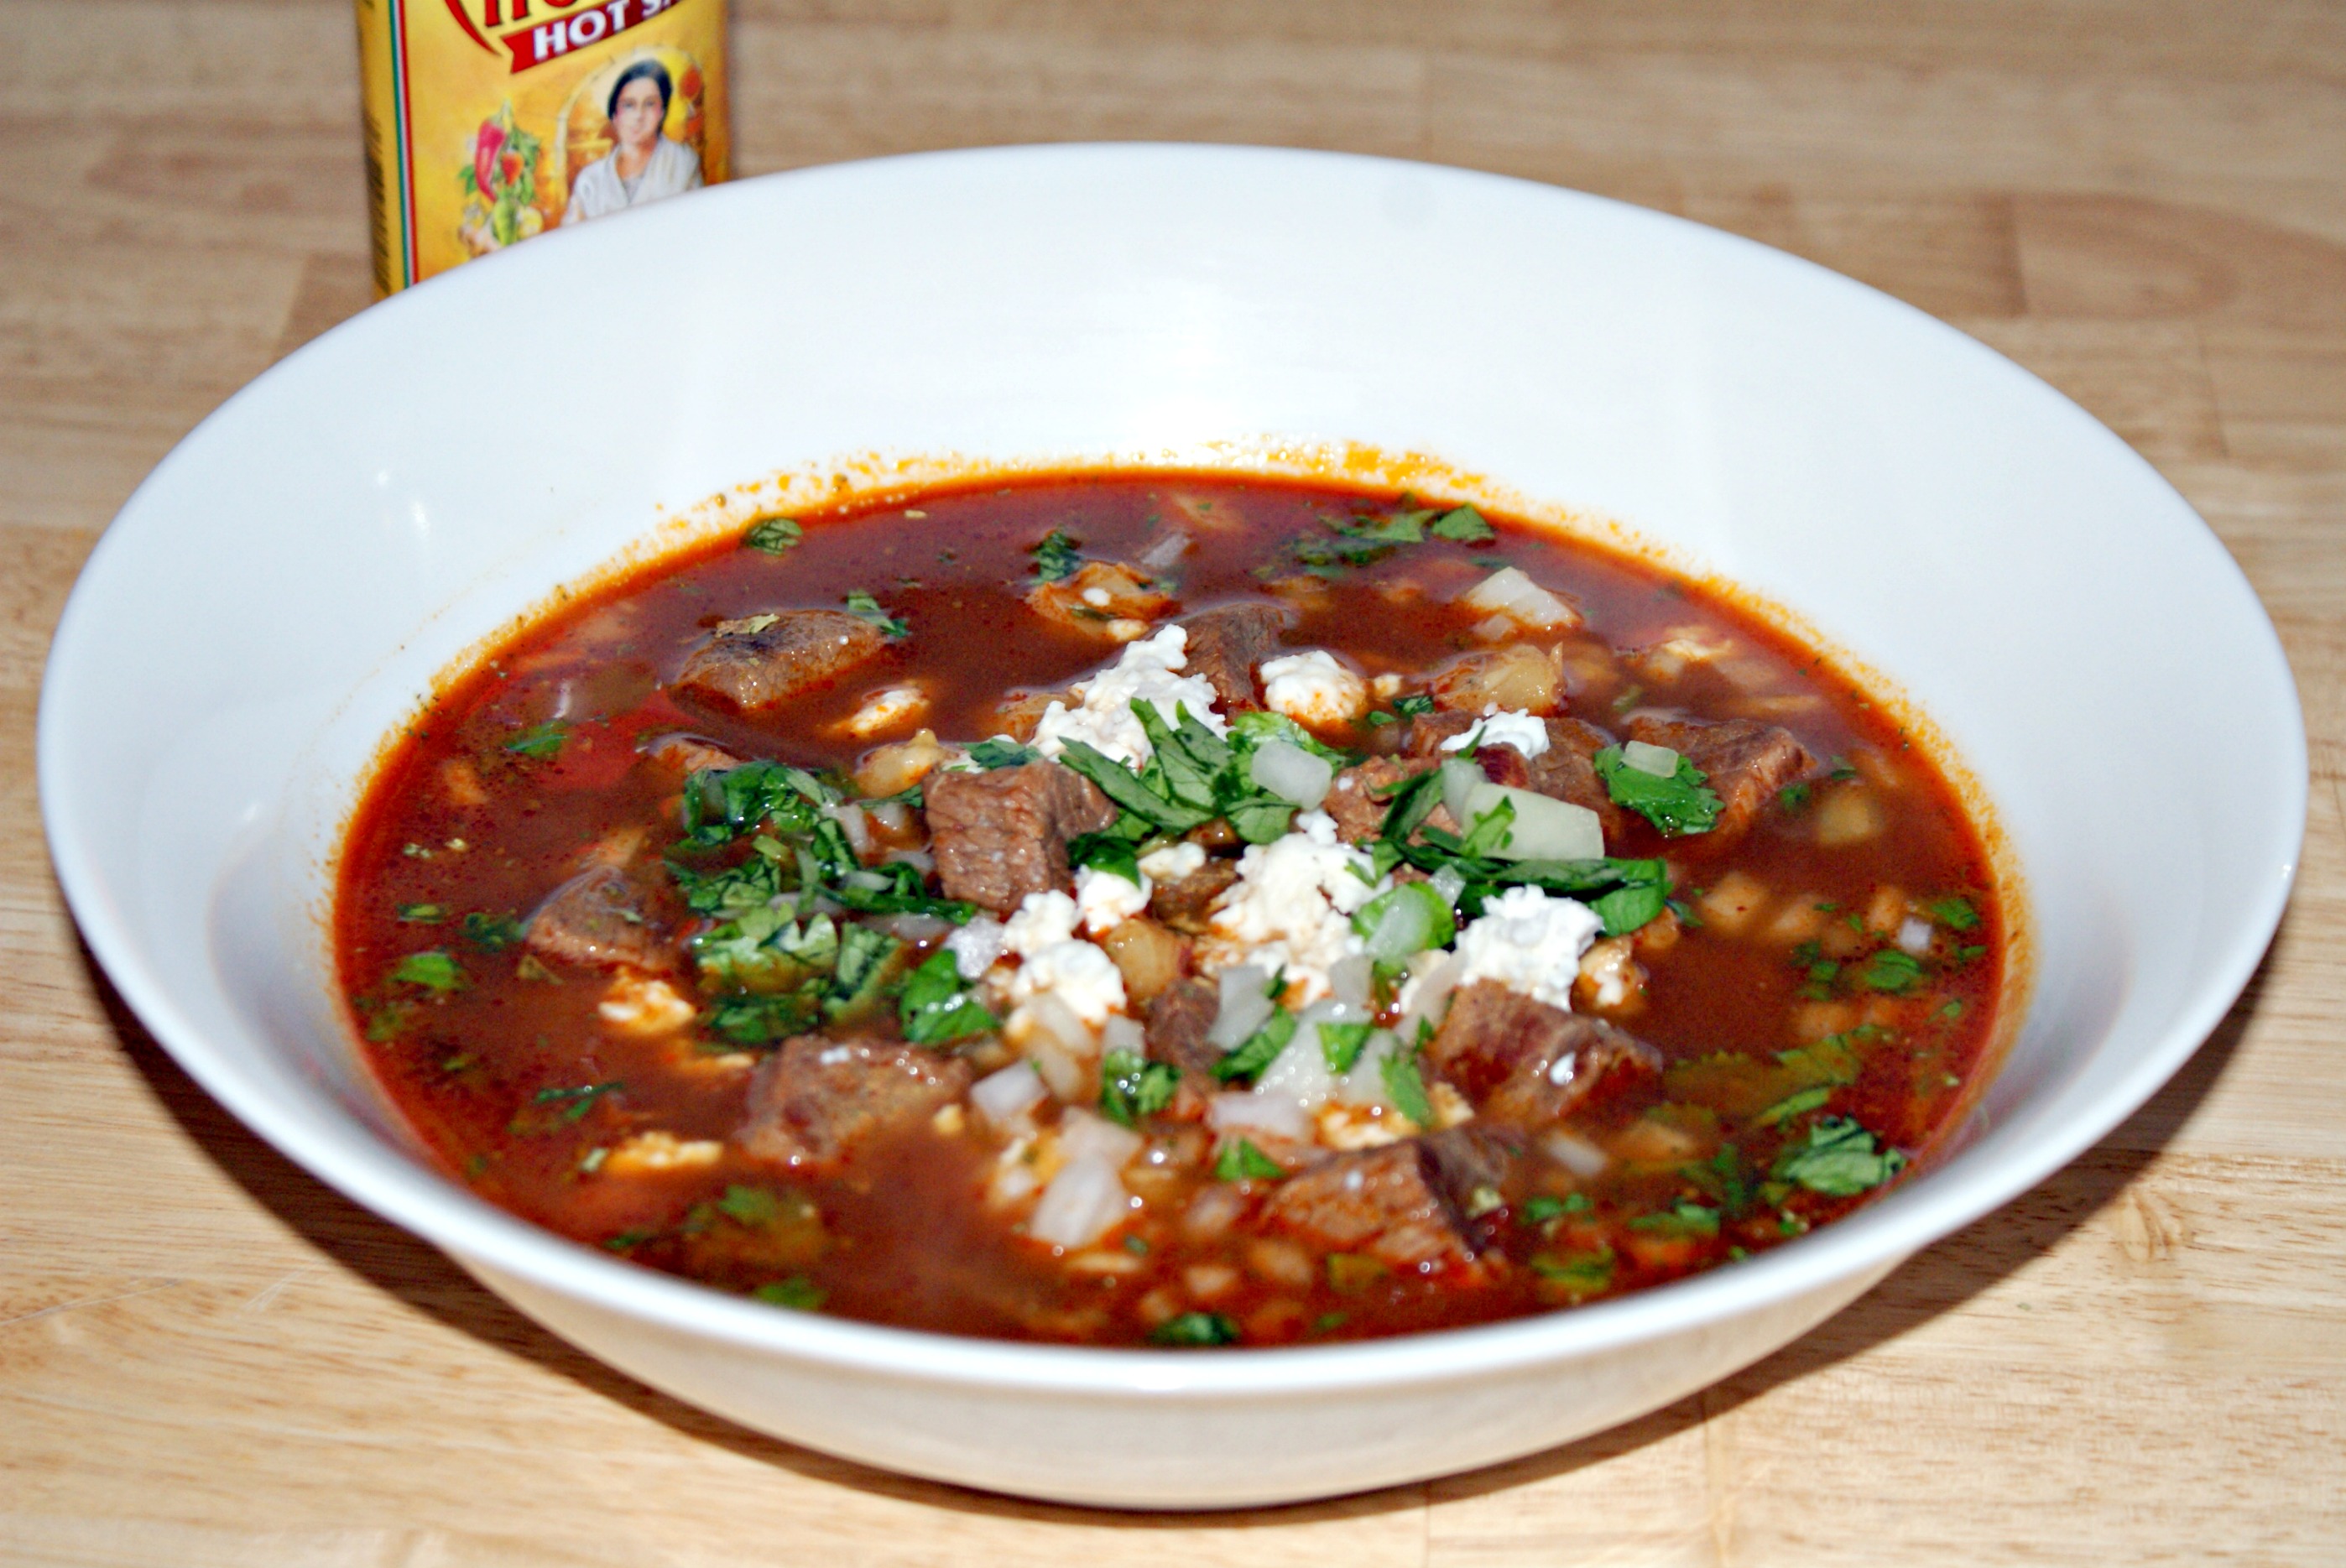 What is a recipe for Mexican pozole?